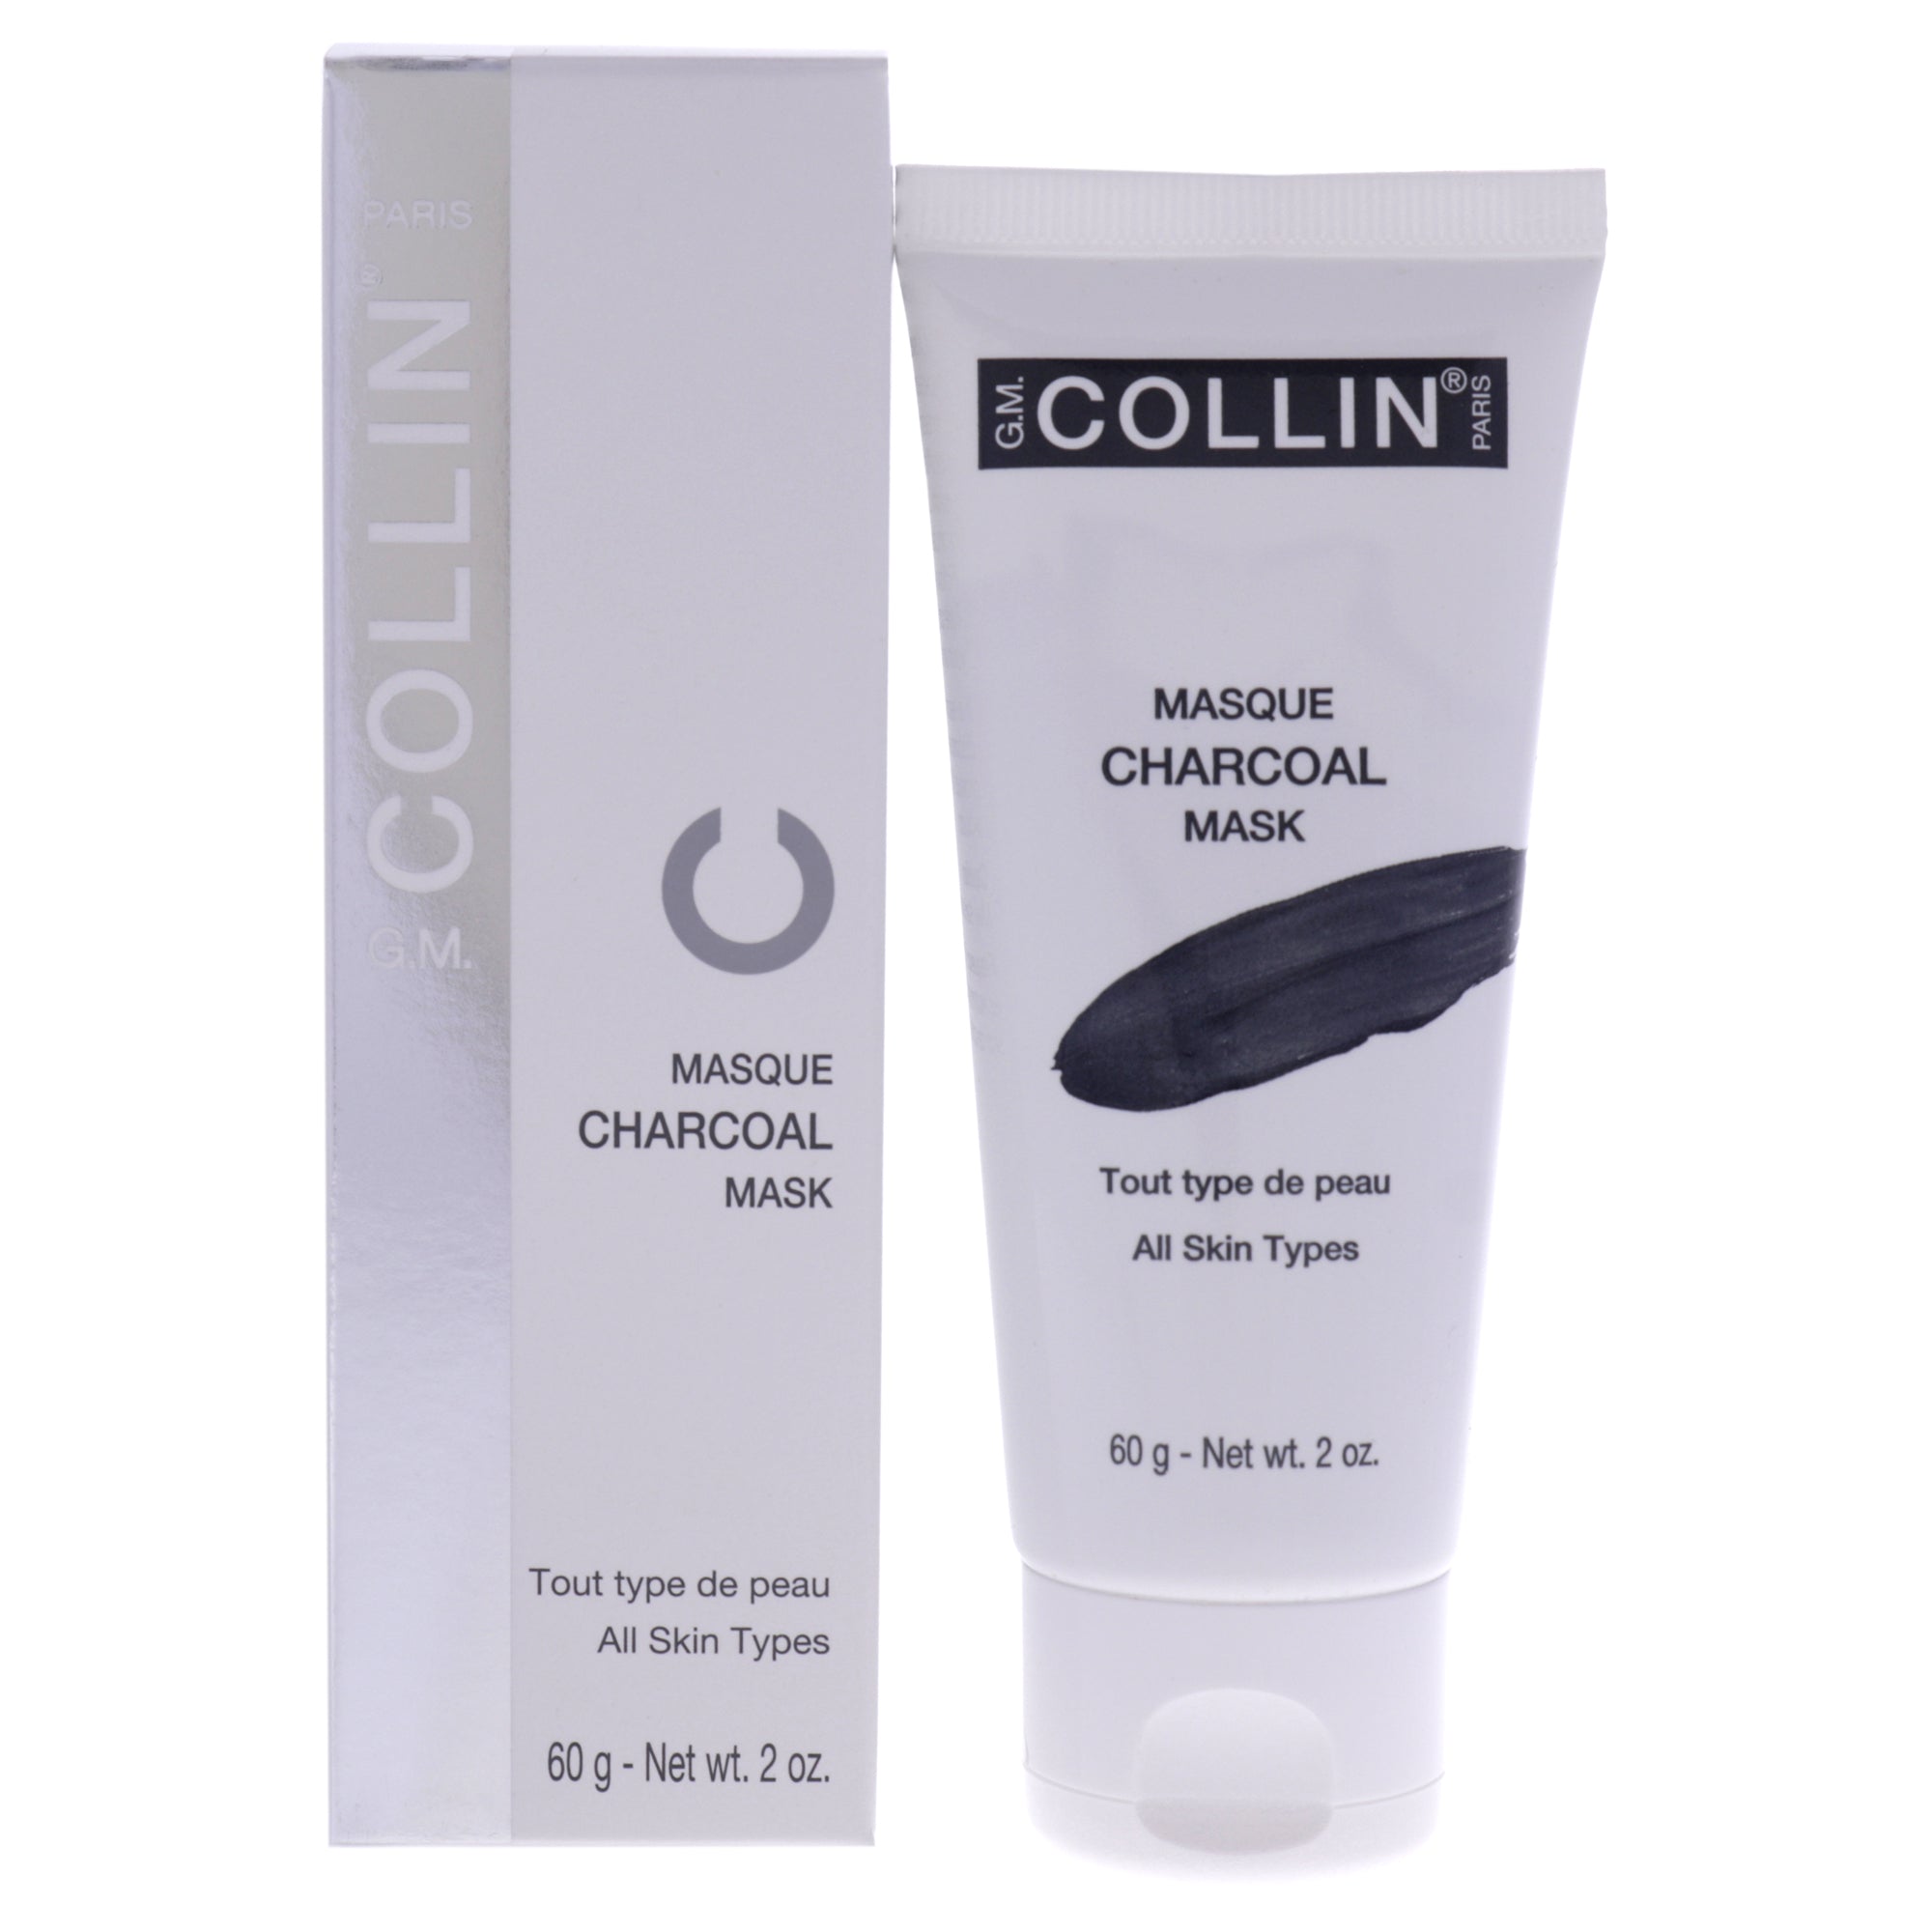 Charcoal Mask by G.M. Collin for Unisex 2 oz Mask